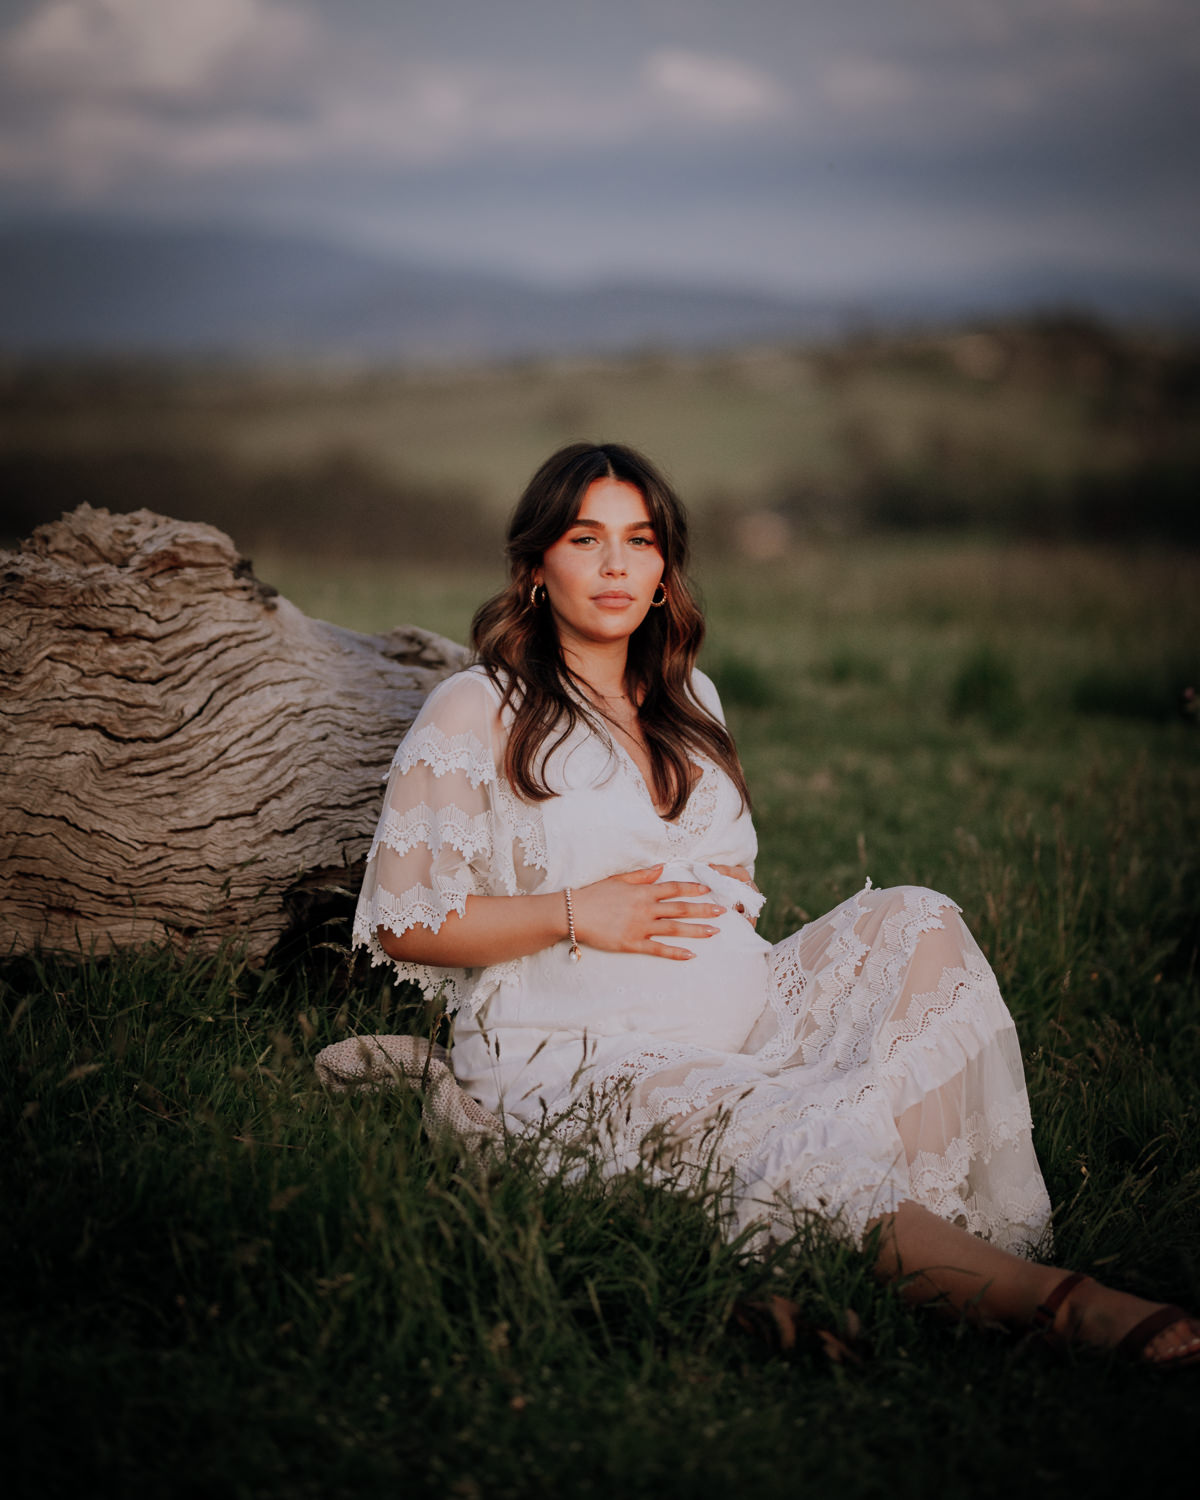 Pregnant lady at her maternity session sitting in the grass leaning against a fallen log with hills in the distance behind her.